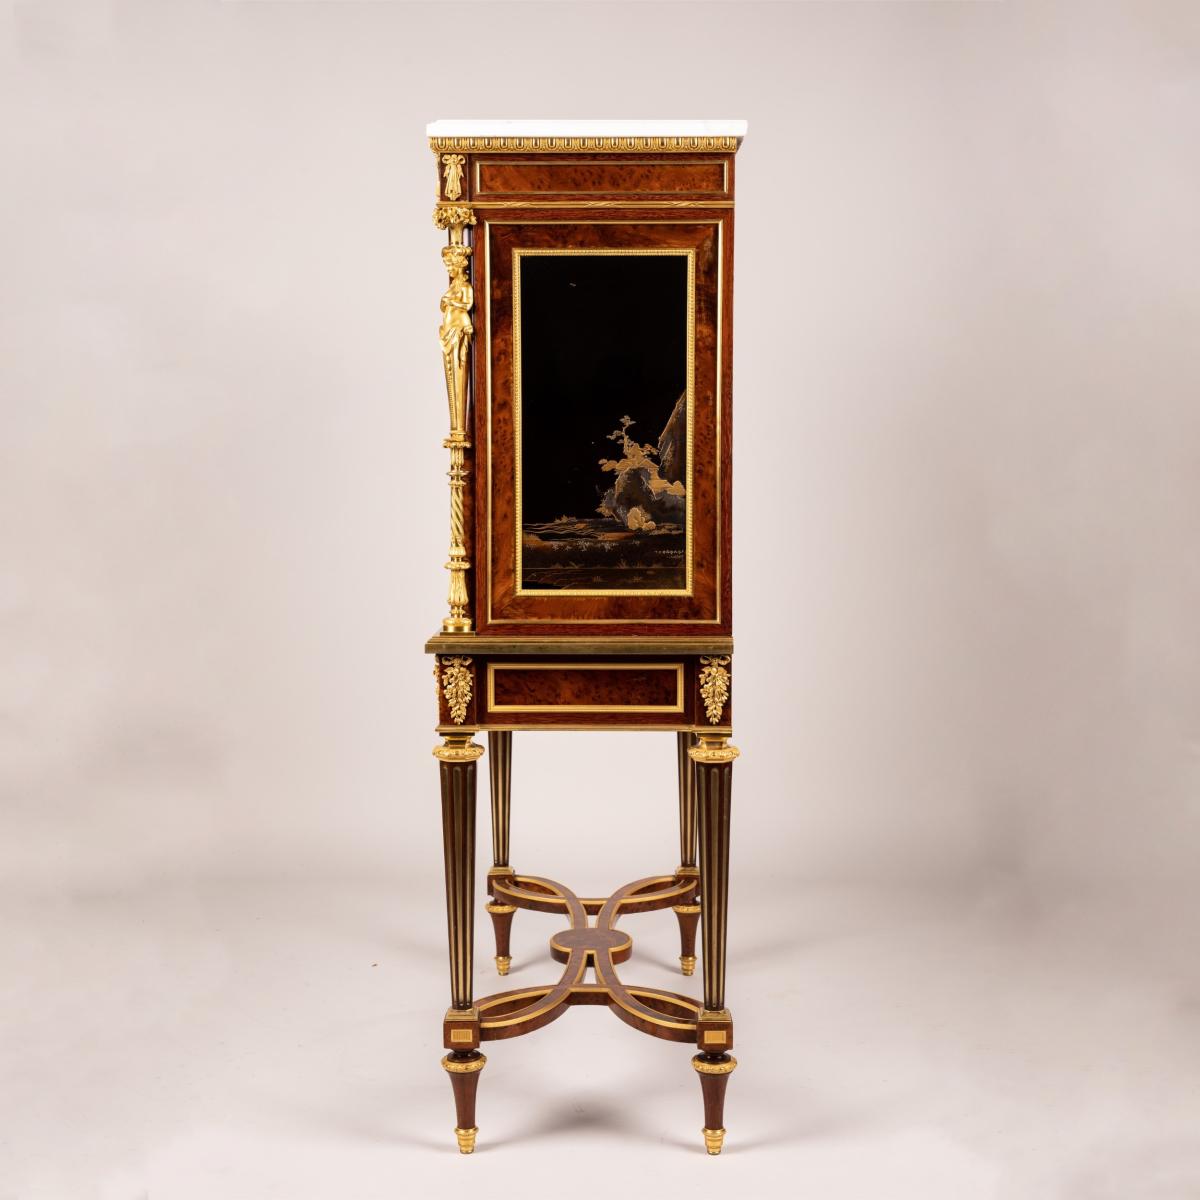 An Exceptional Secretaire à Abattant by Charles-Guillaume Winckelsen